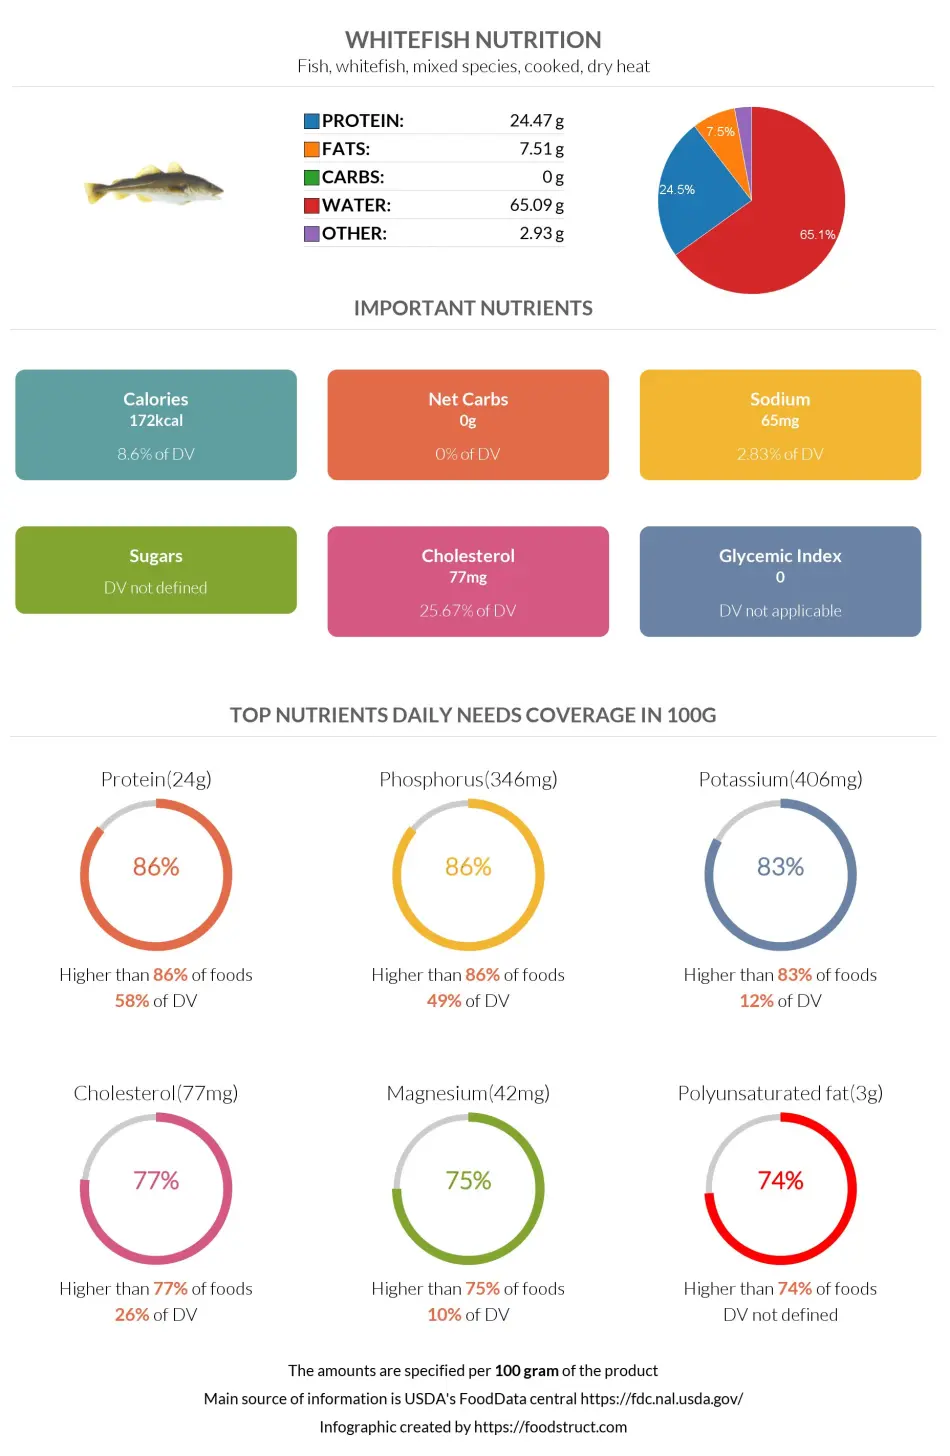 Whitefish nutrition infographic